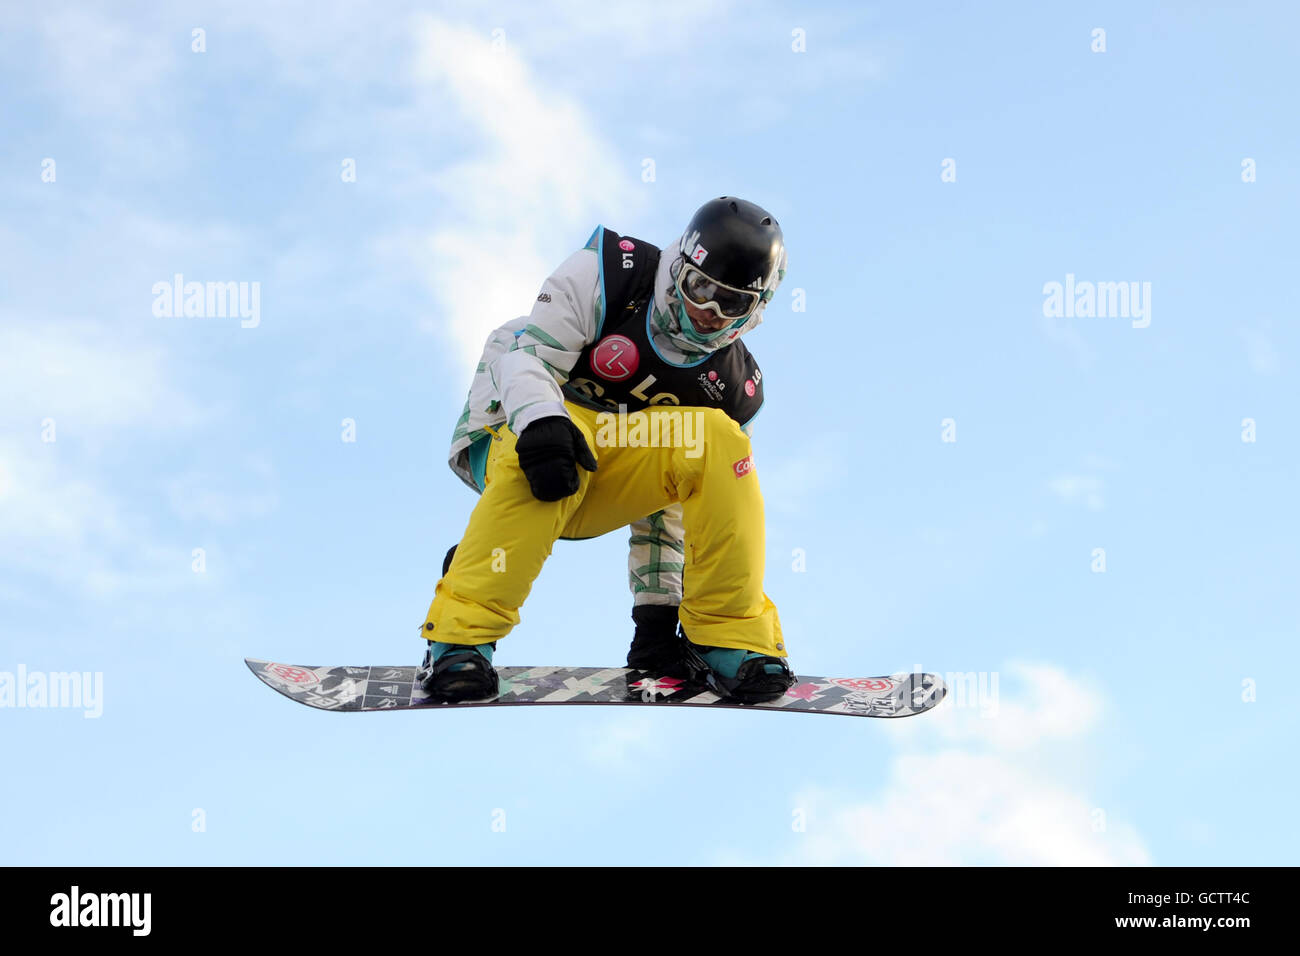 Adrian Krainer of Austria during the LG Snowboard FIS World Cup in London Stock Photo